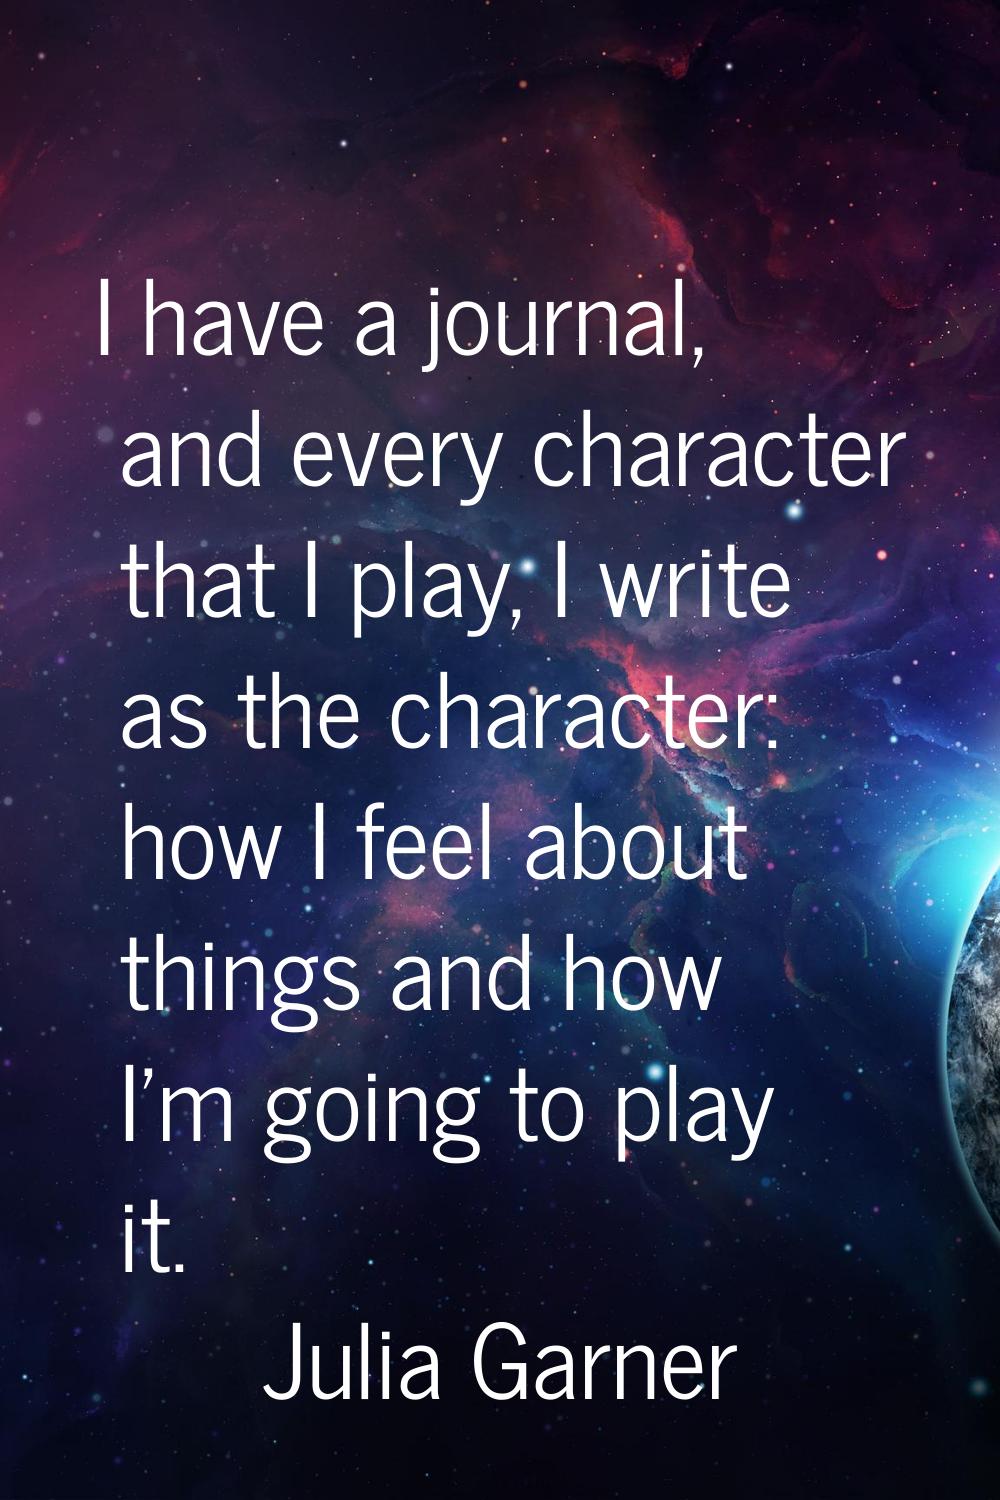 I have a journal, and every character that I play, I write as the character: how I feel about thing